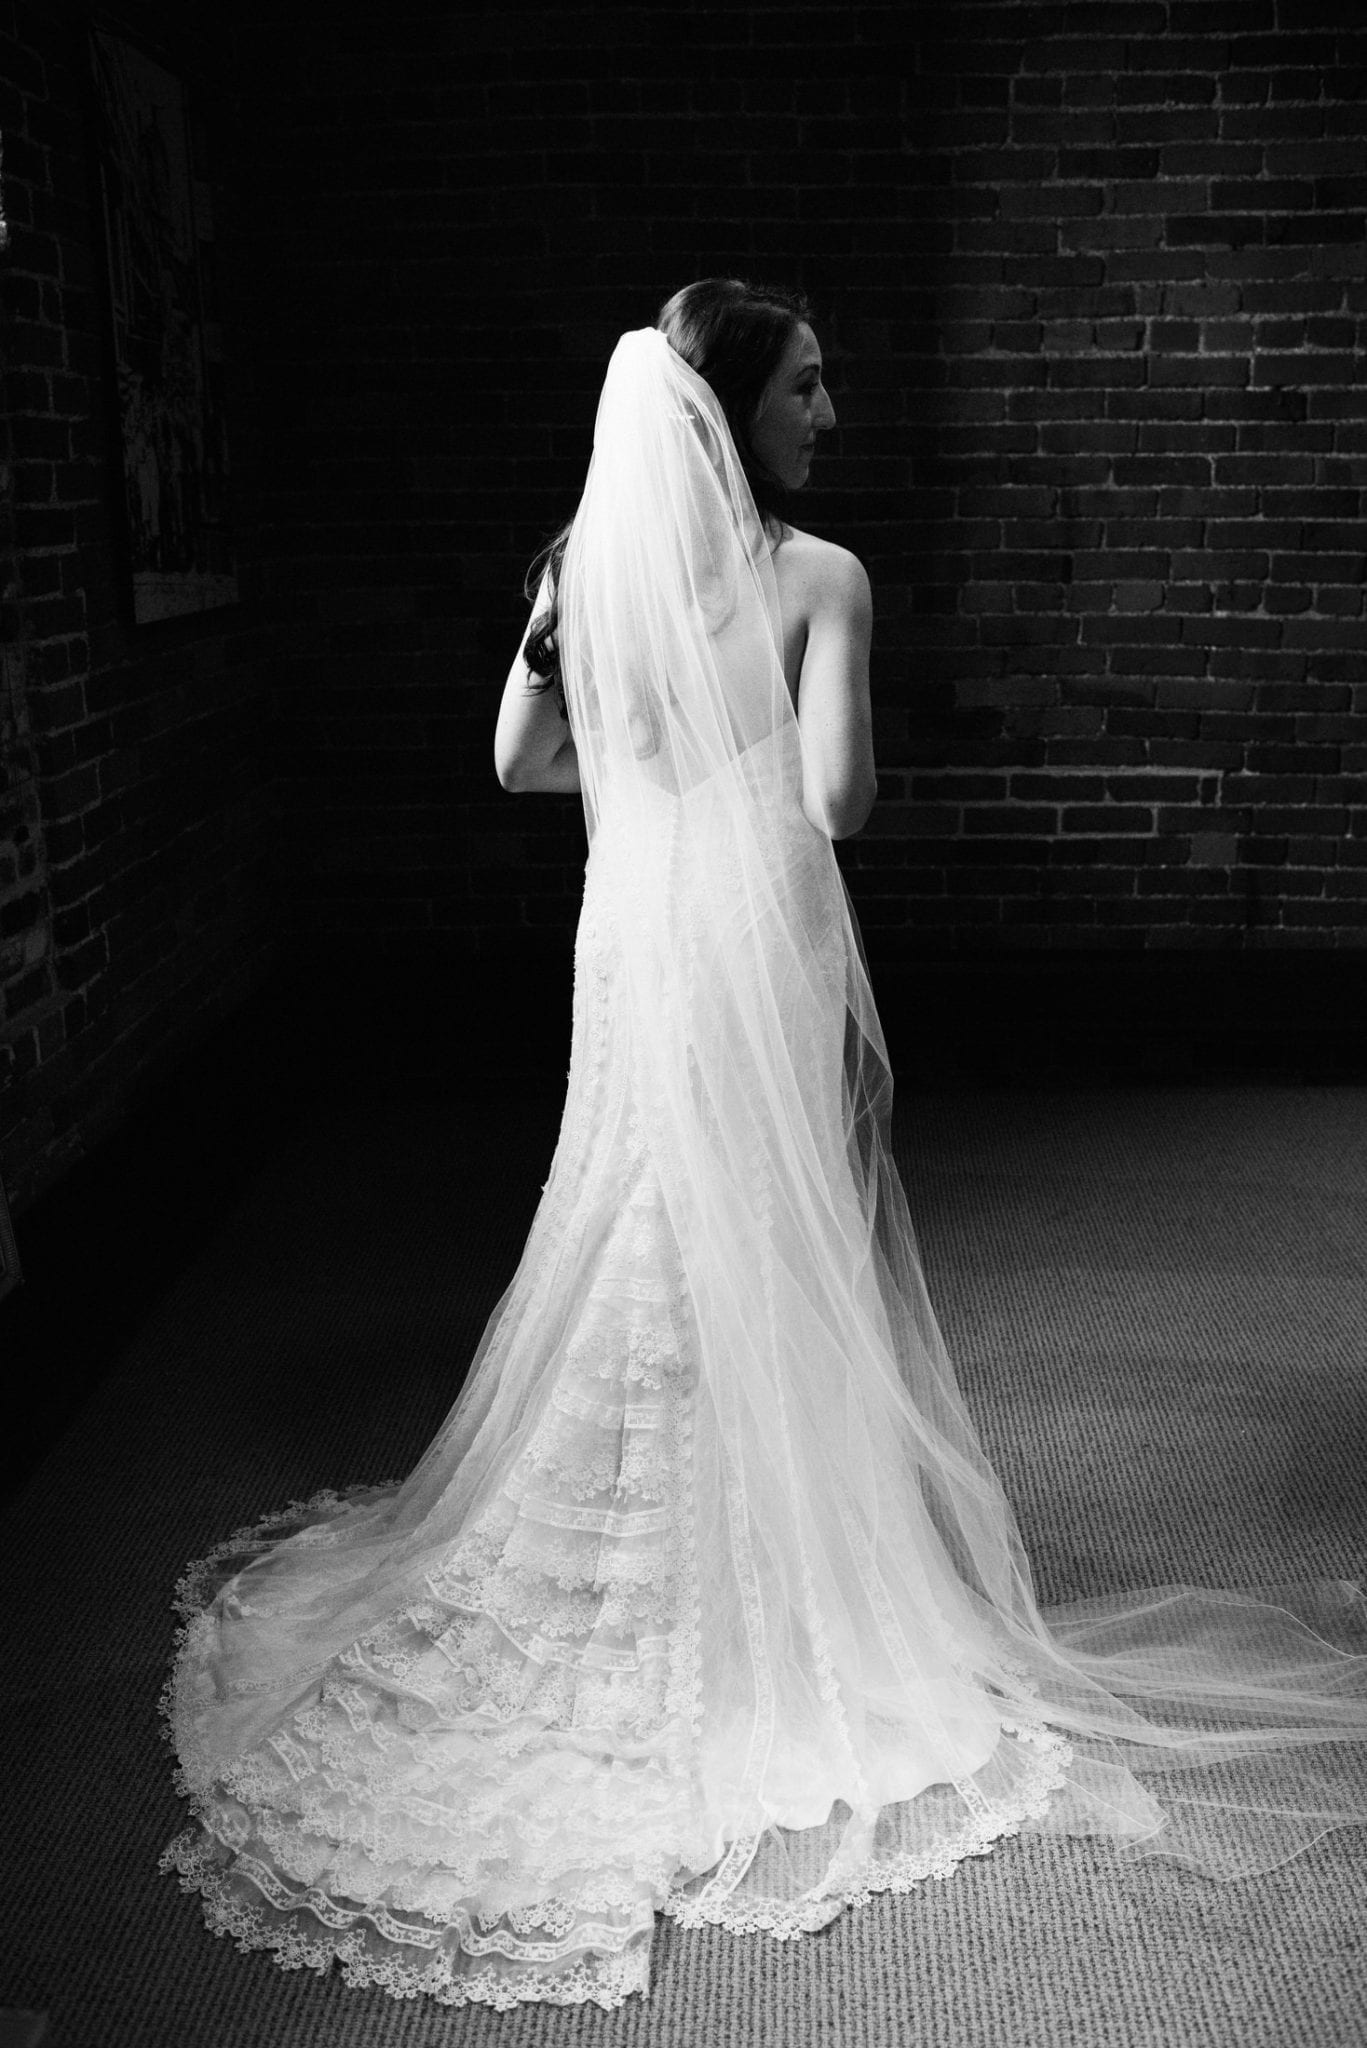 Bride seen from behind with long veil and train in the library & archives conference room